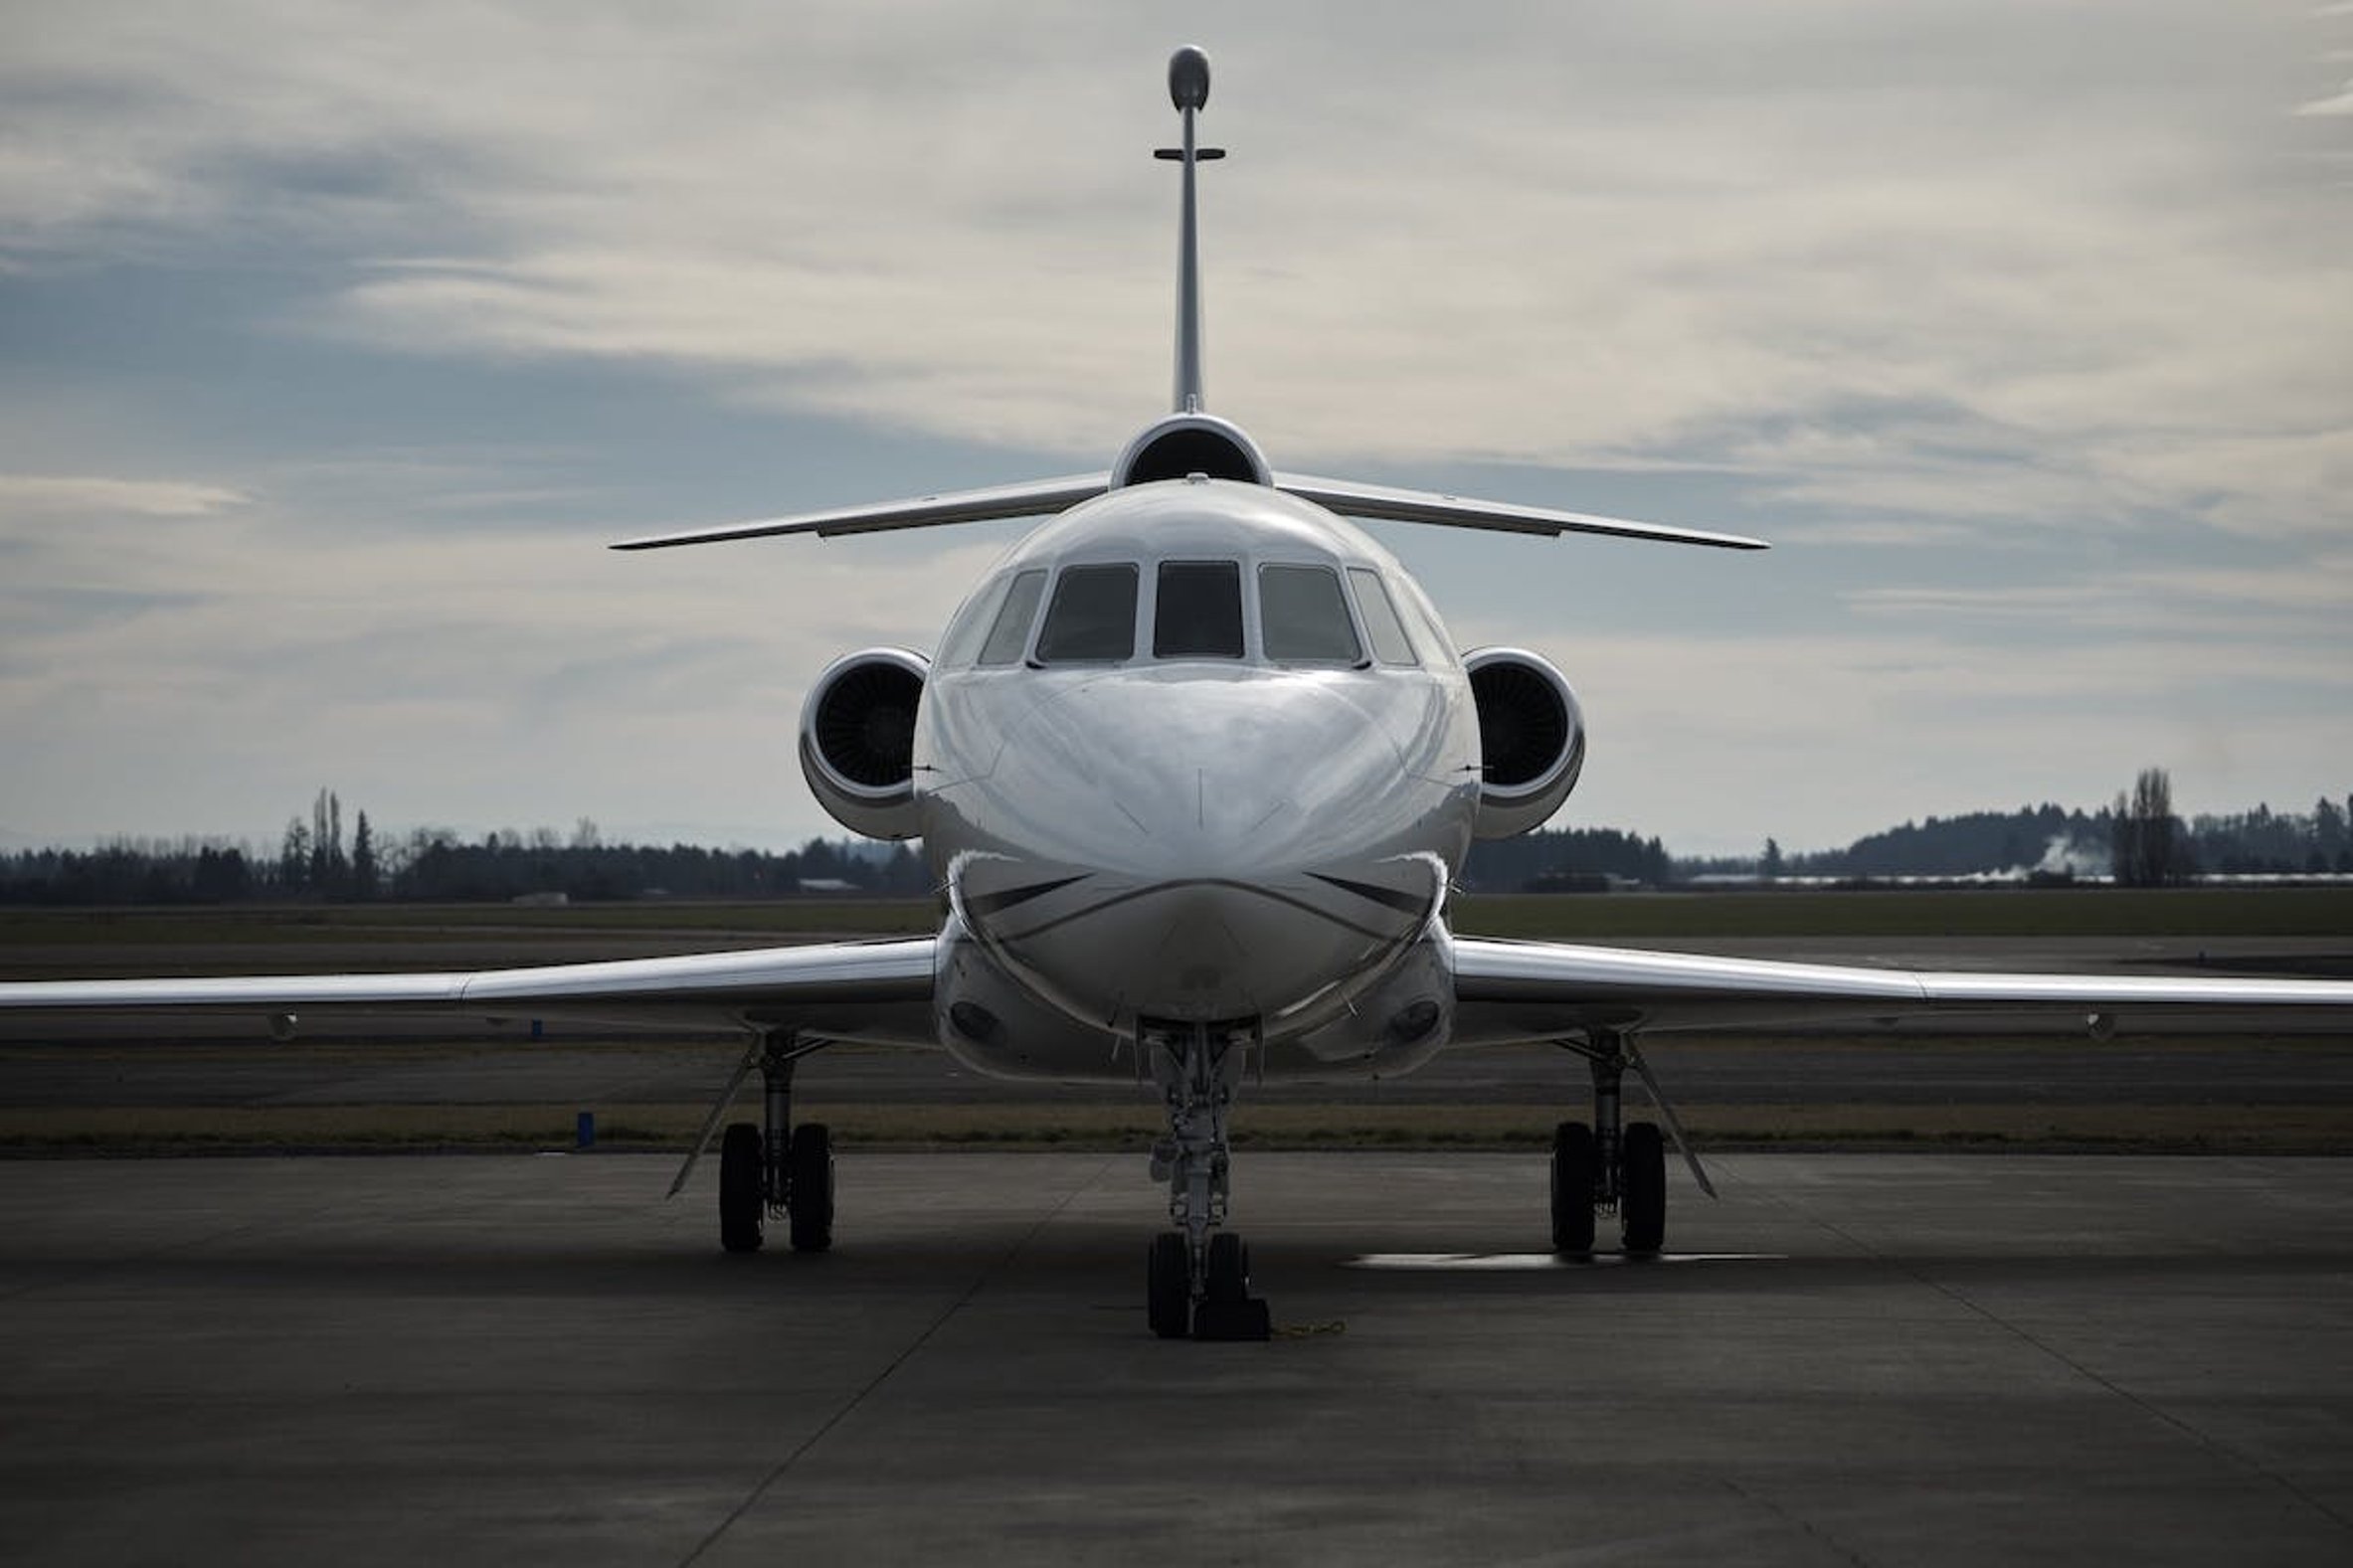 Casting Males and Females For A Private Jet Promo